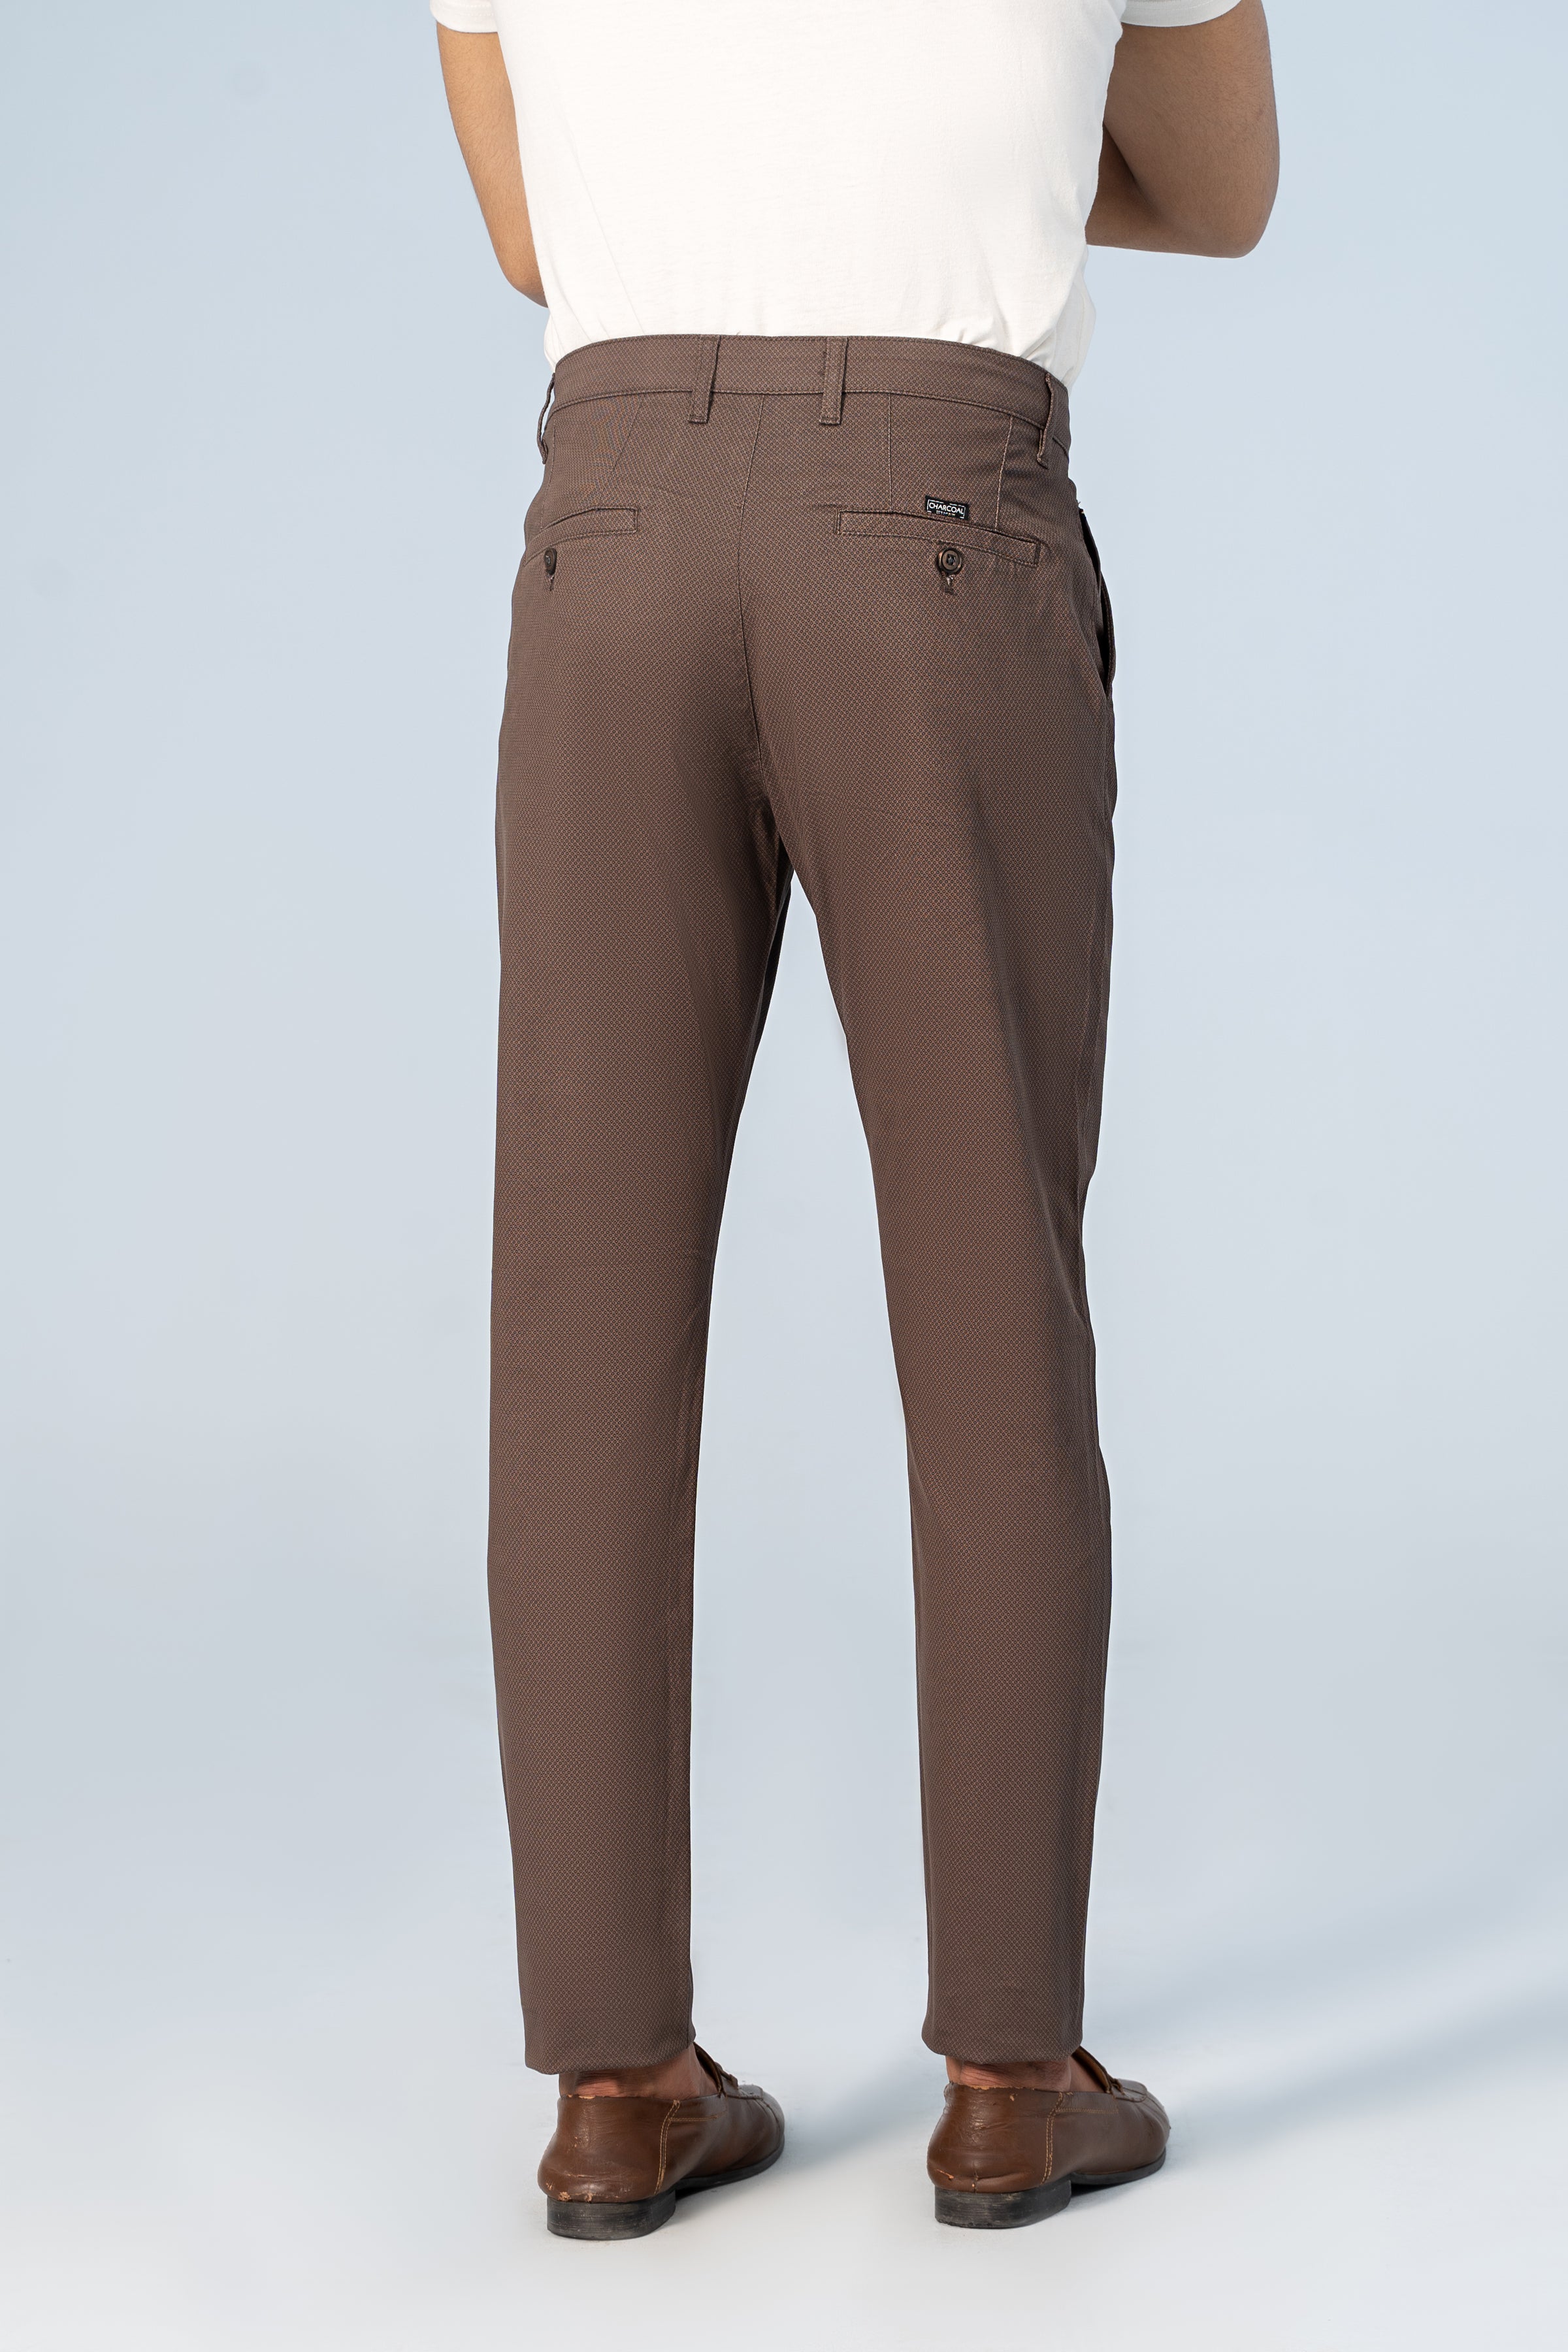 CASUAL PANT CROSS POCKET BROWN - Charcoal Clothing